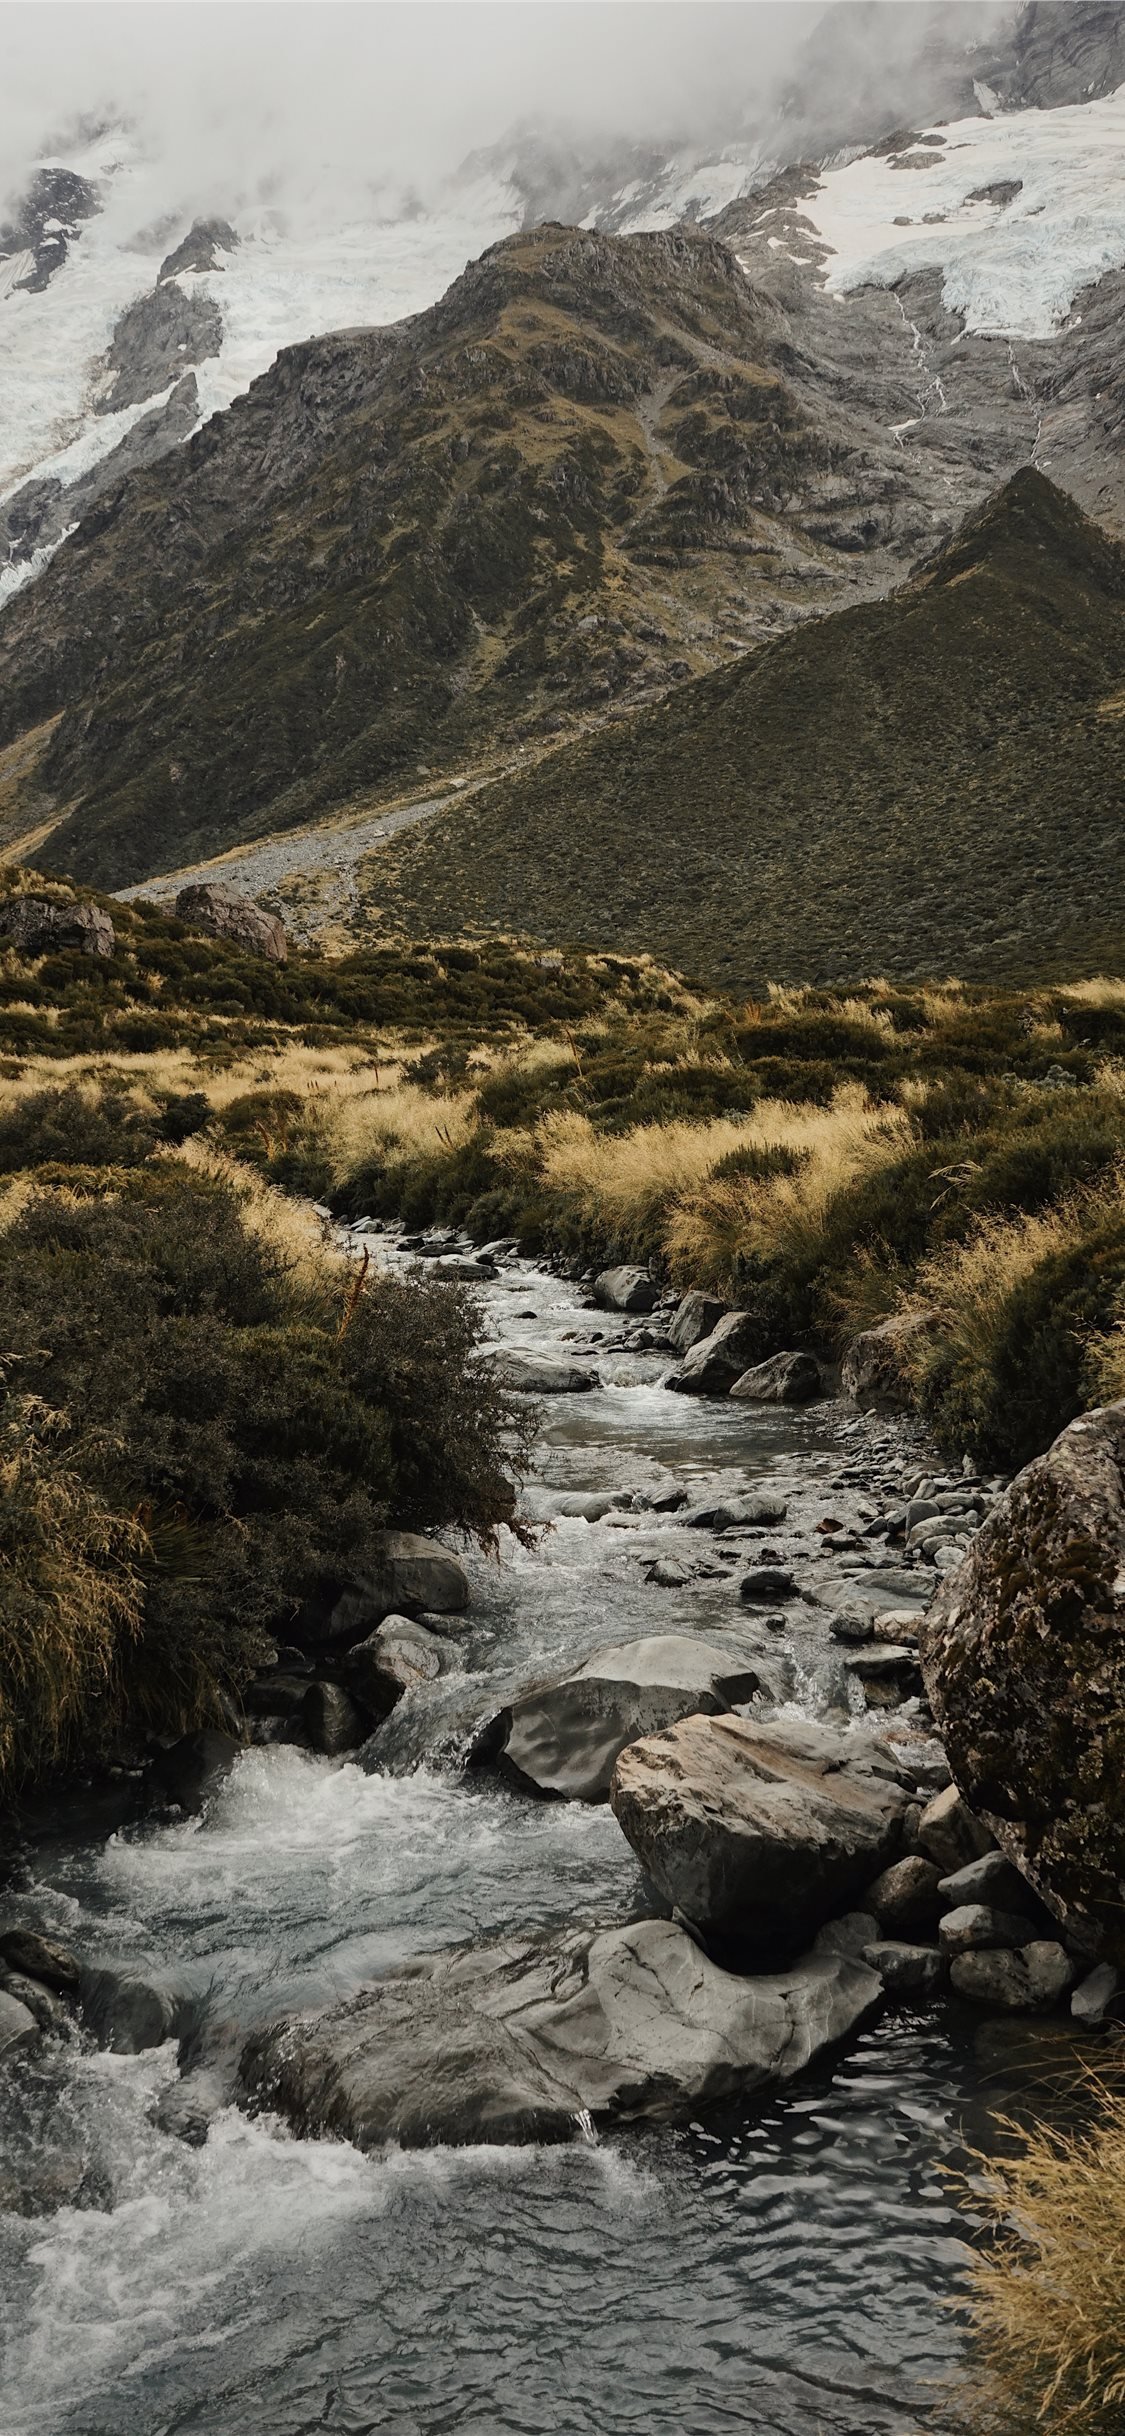 water stream near mountains iPhone X Wallpaper Free Download